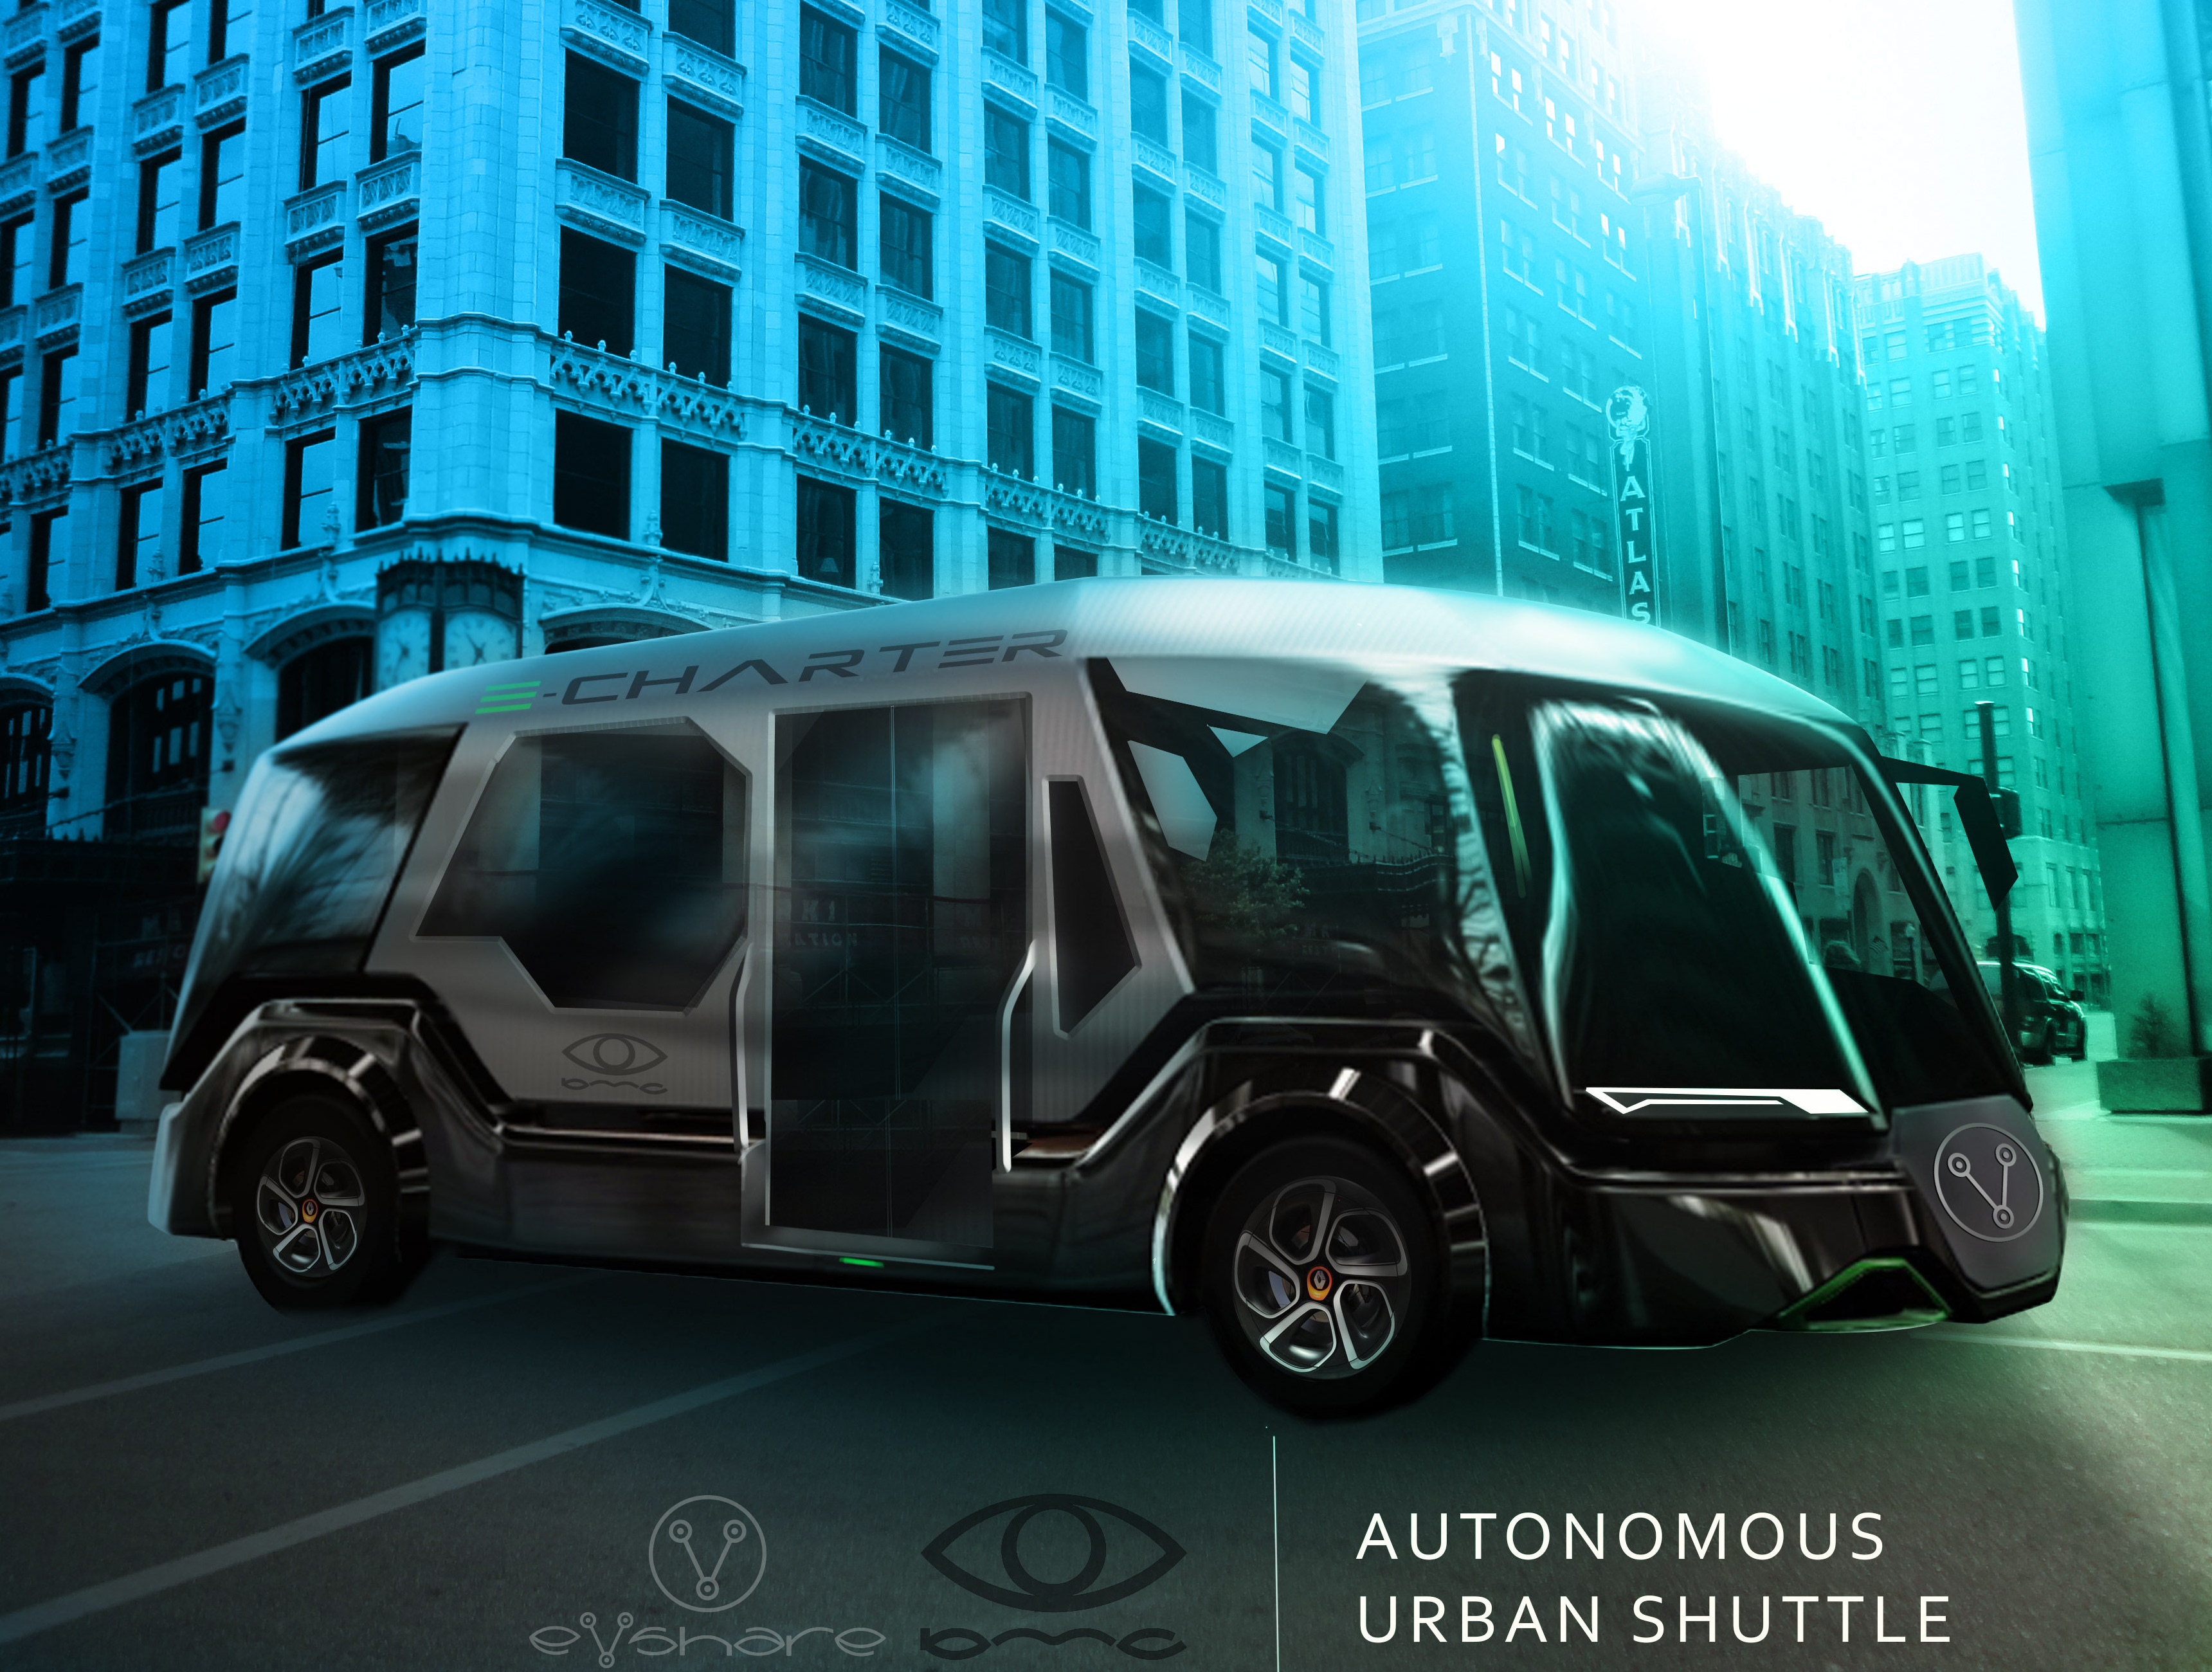 The EVShare green, clean autonomous urban shuttle is made possible with RSK Bitcoin Smart Contracts